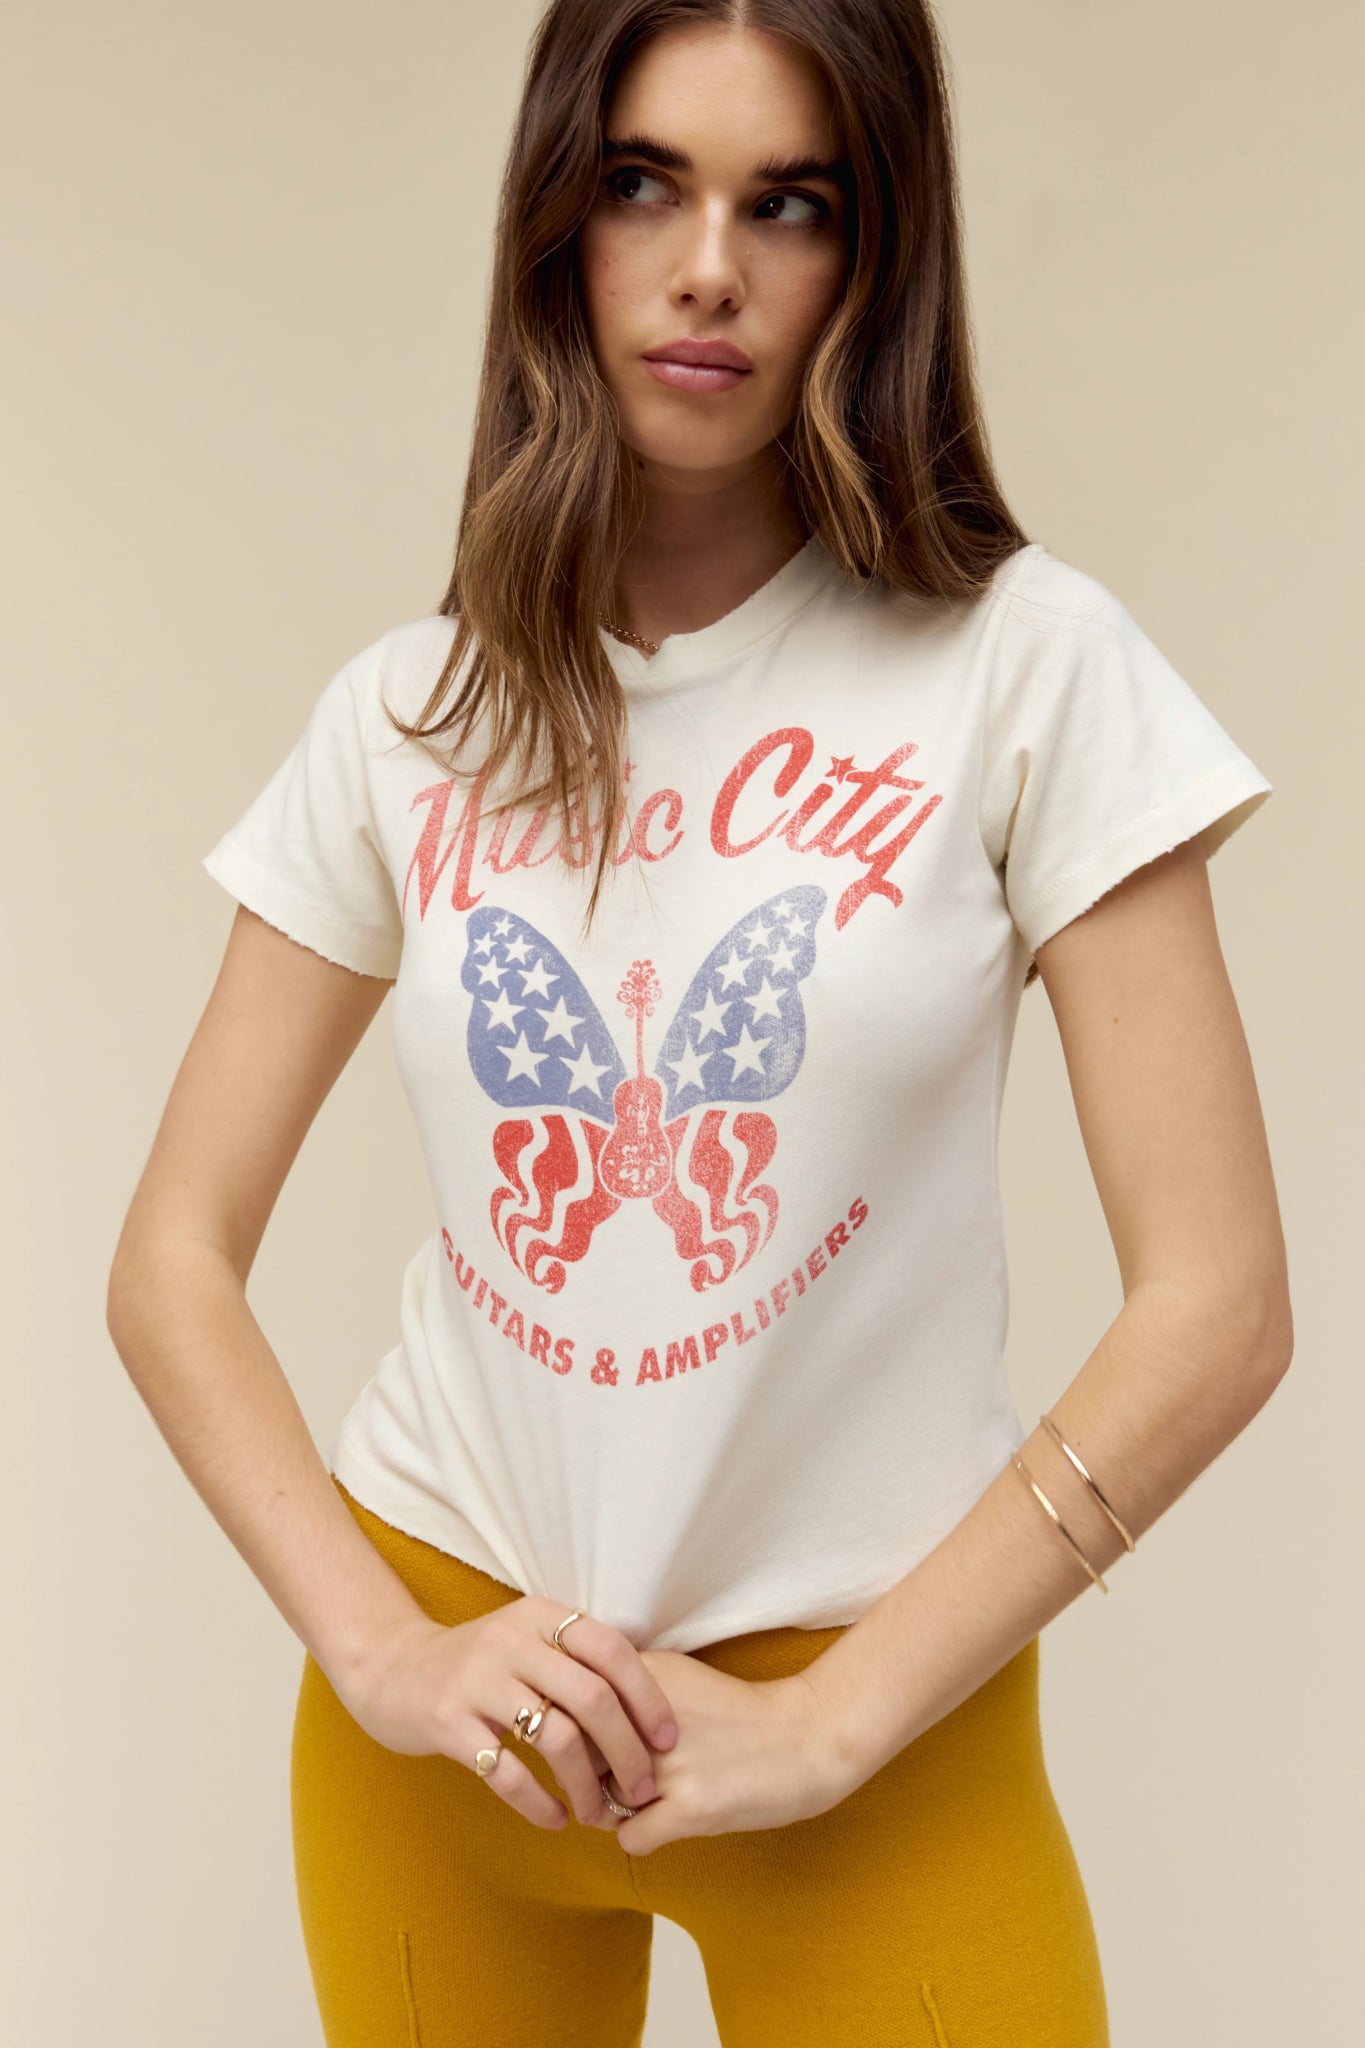 Daydreamer Graphic Tee | Music City Butterfly | Vintage T-Shirt - Women's Shirts & Tops - Blooming Daily